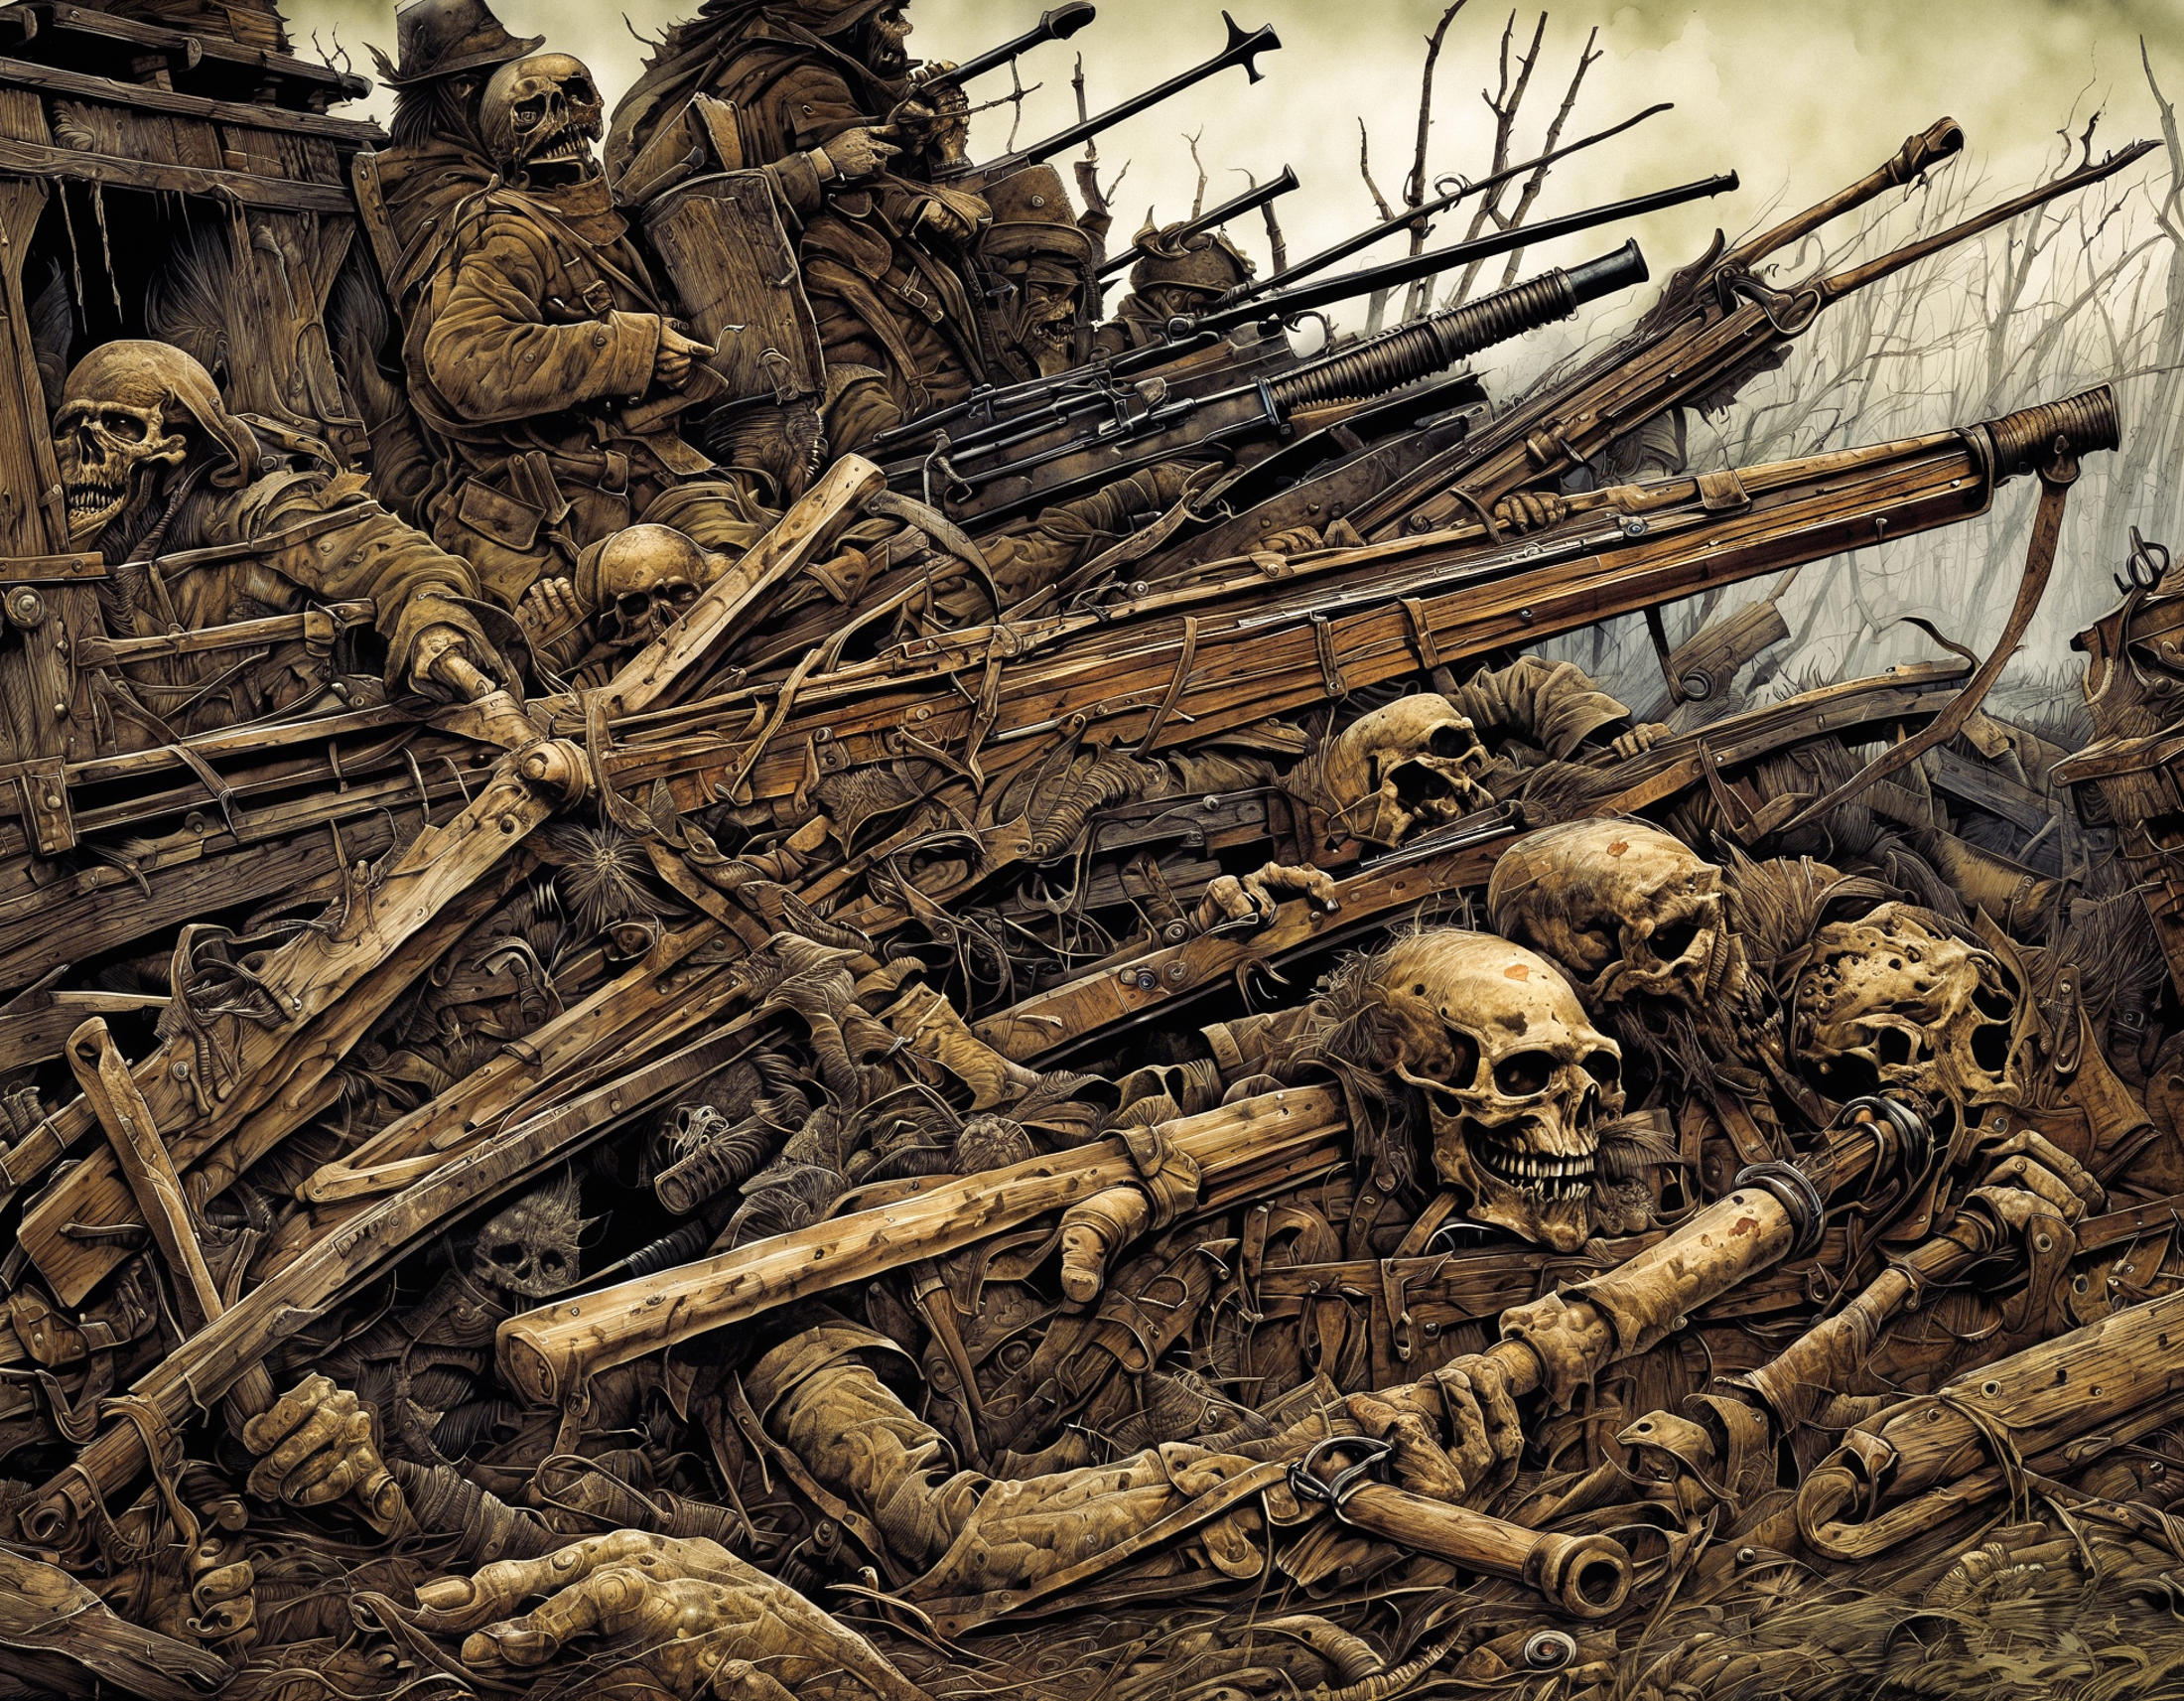 A pile of guns and skulls in a dirt field.